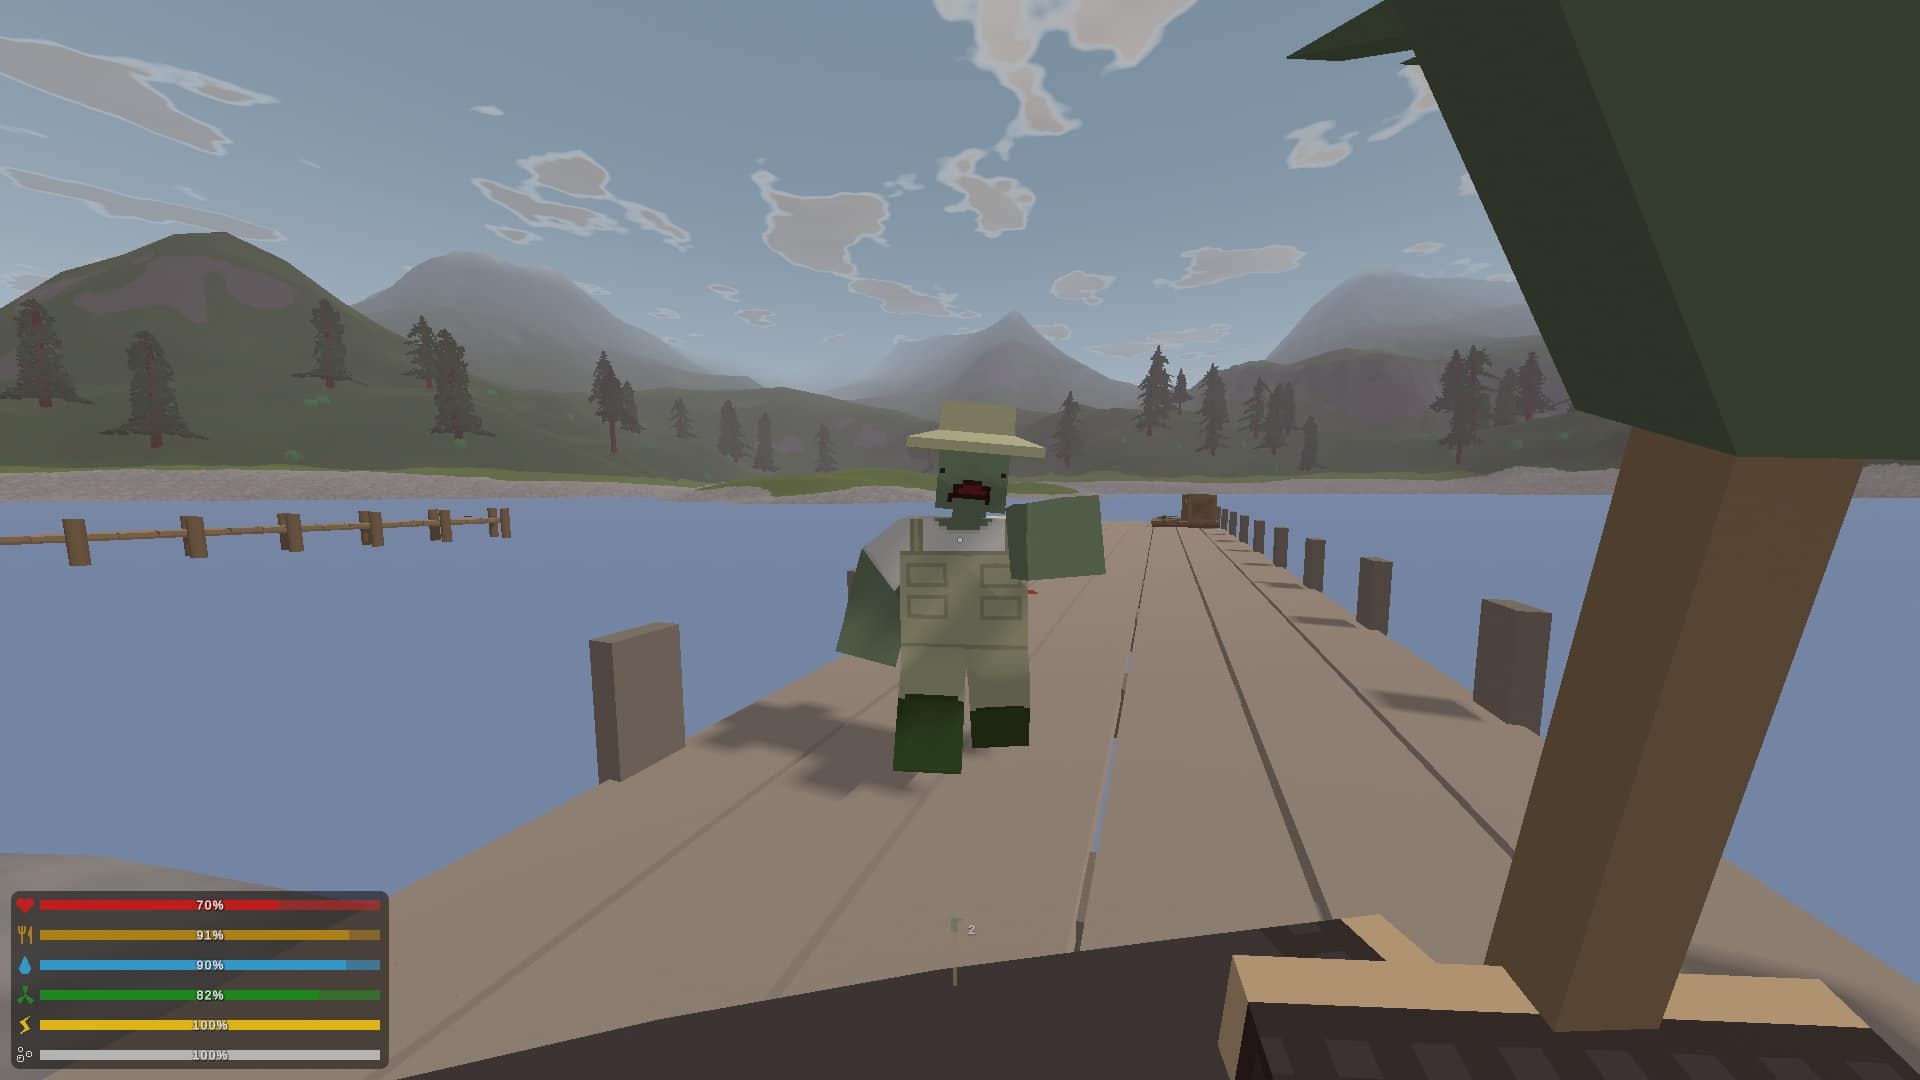 (In Unturned, I explore the world and have to defend myself against zombie fishermen.)